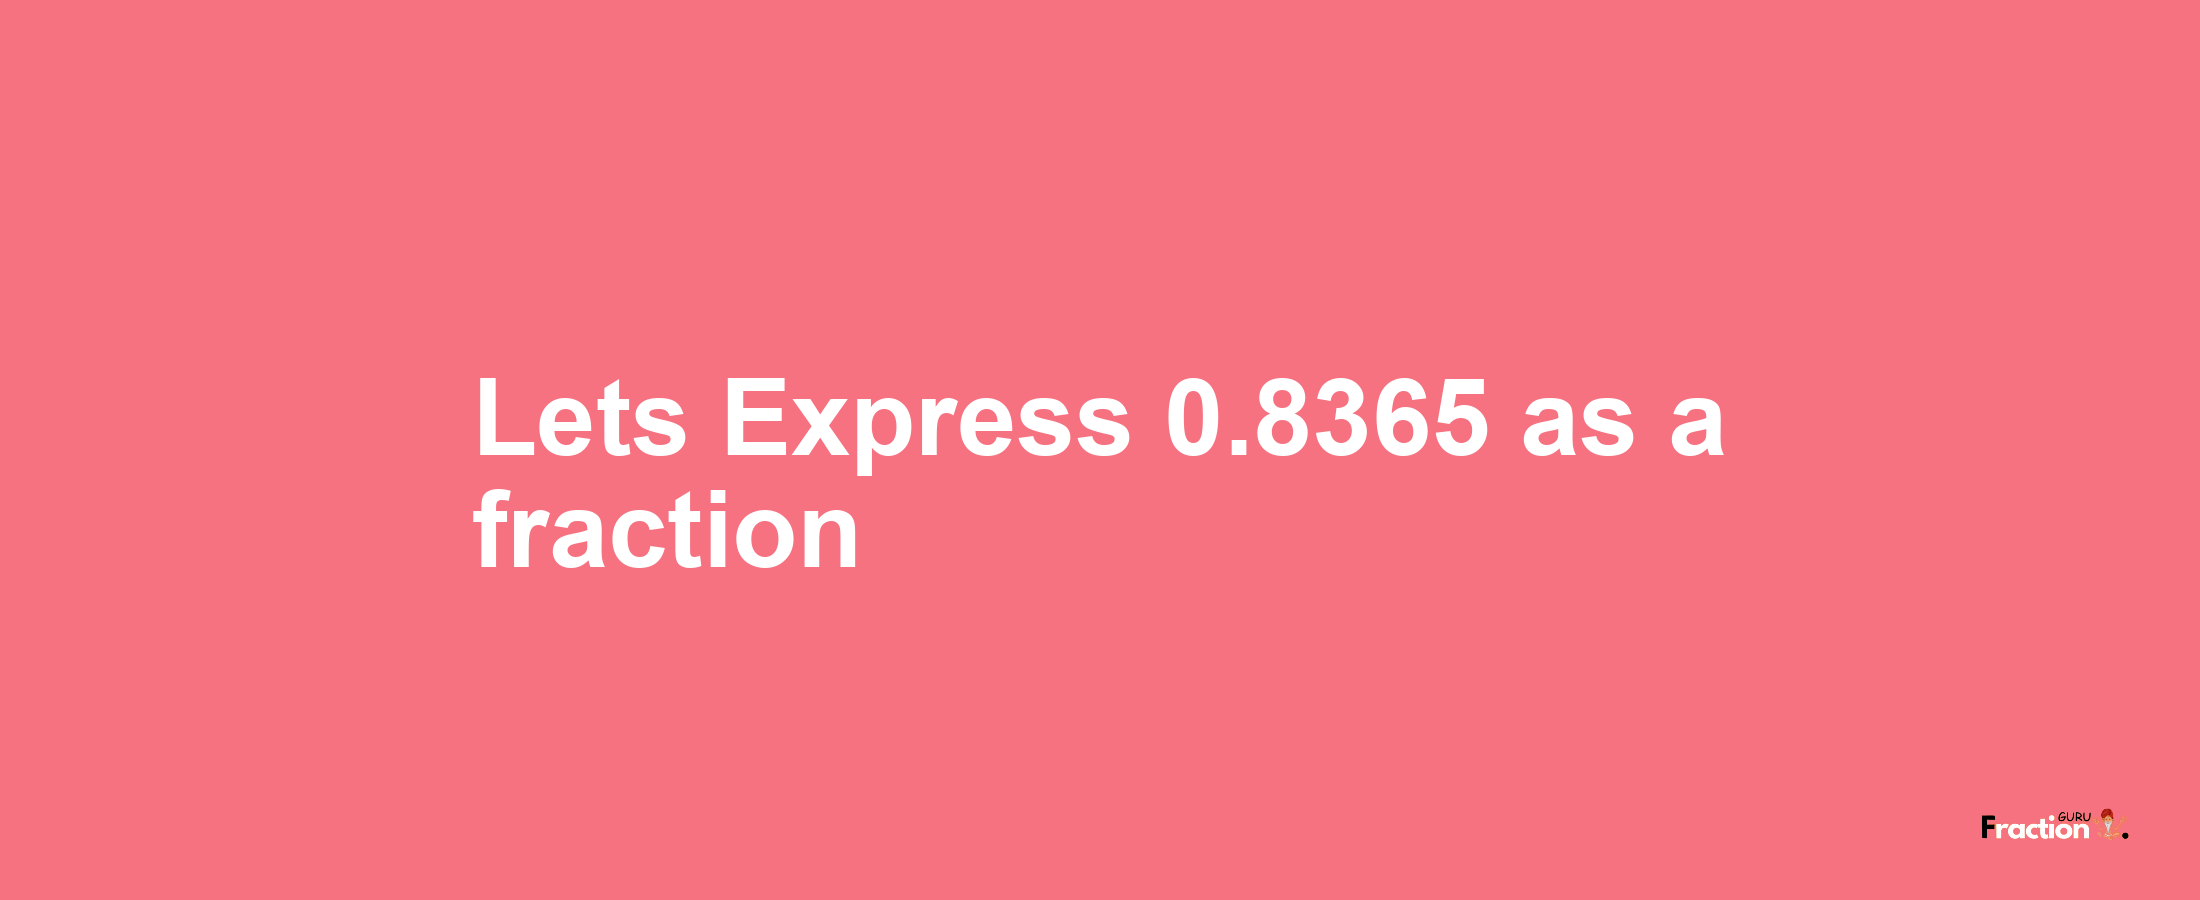 Lets Express 0.8365 as afraction